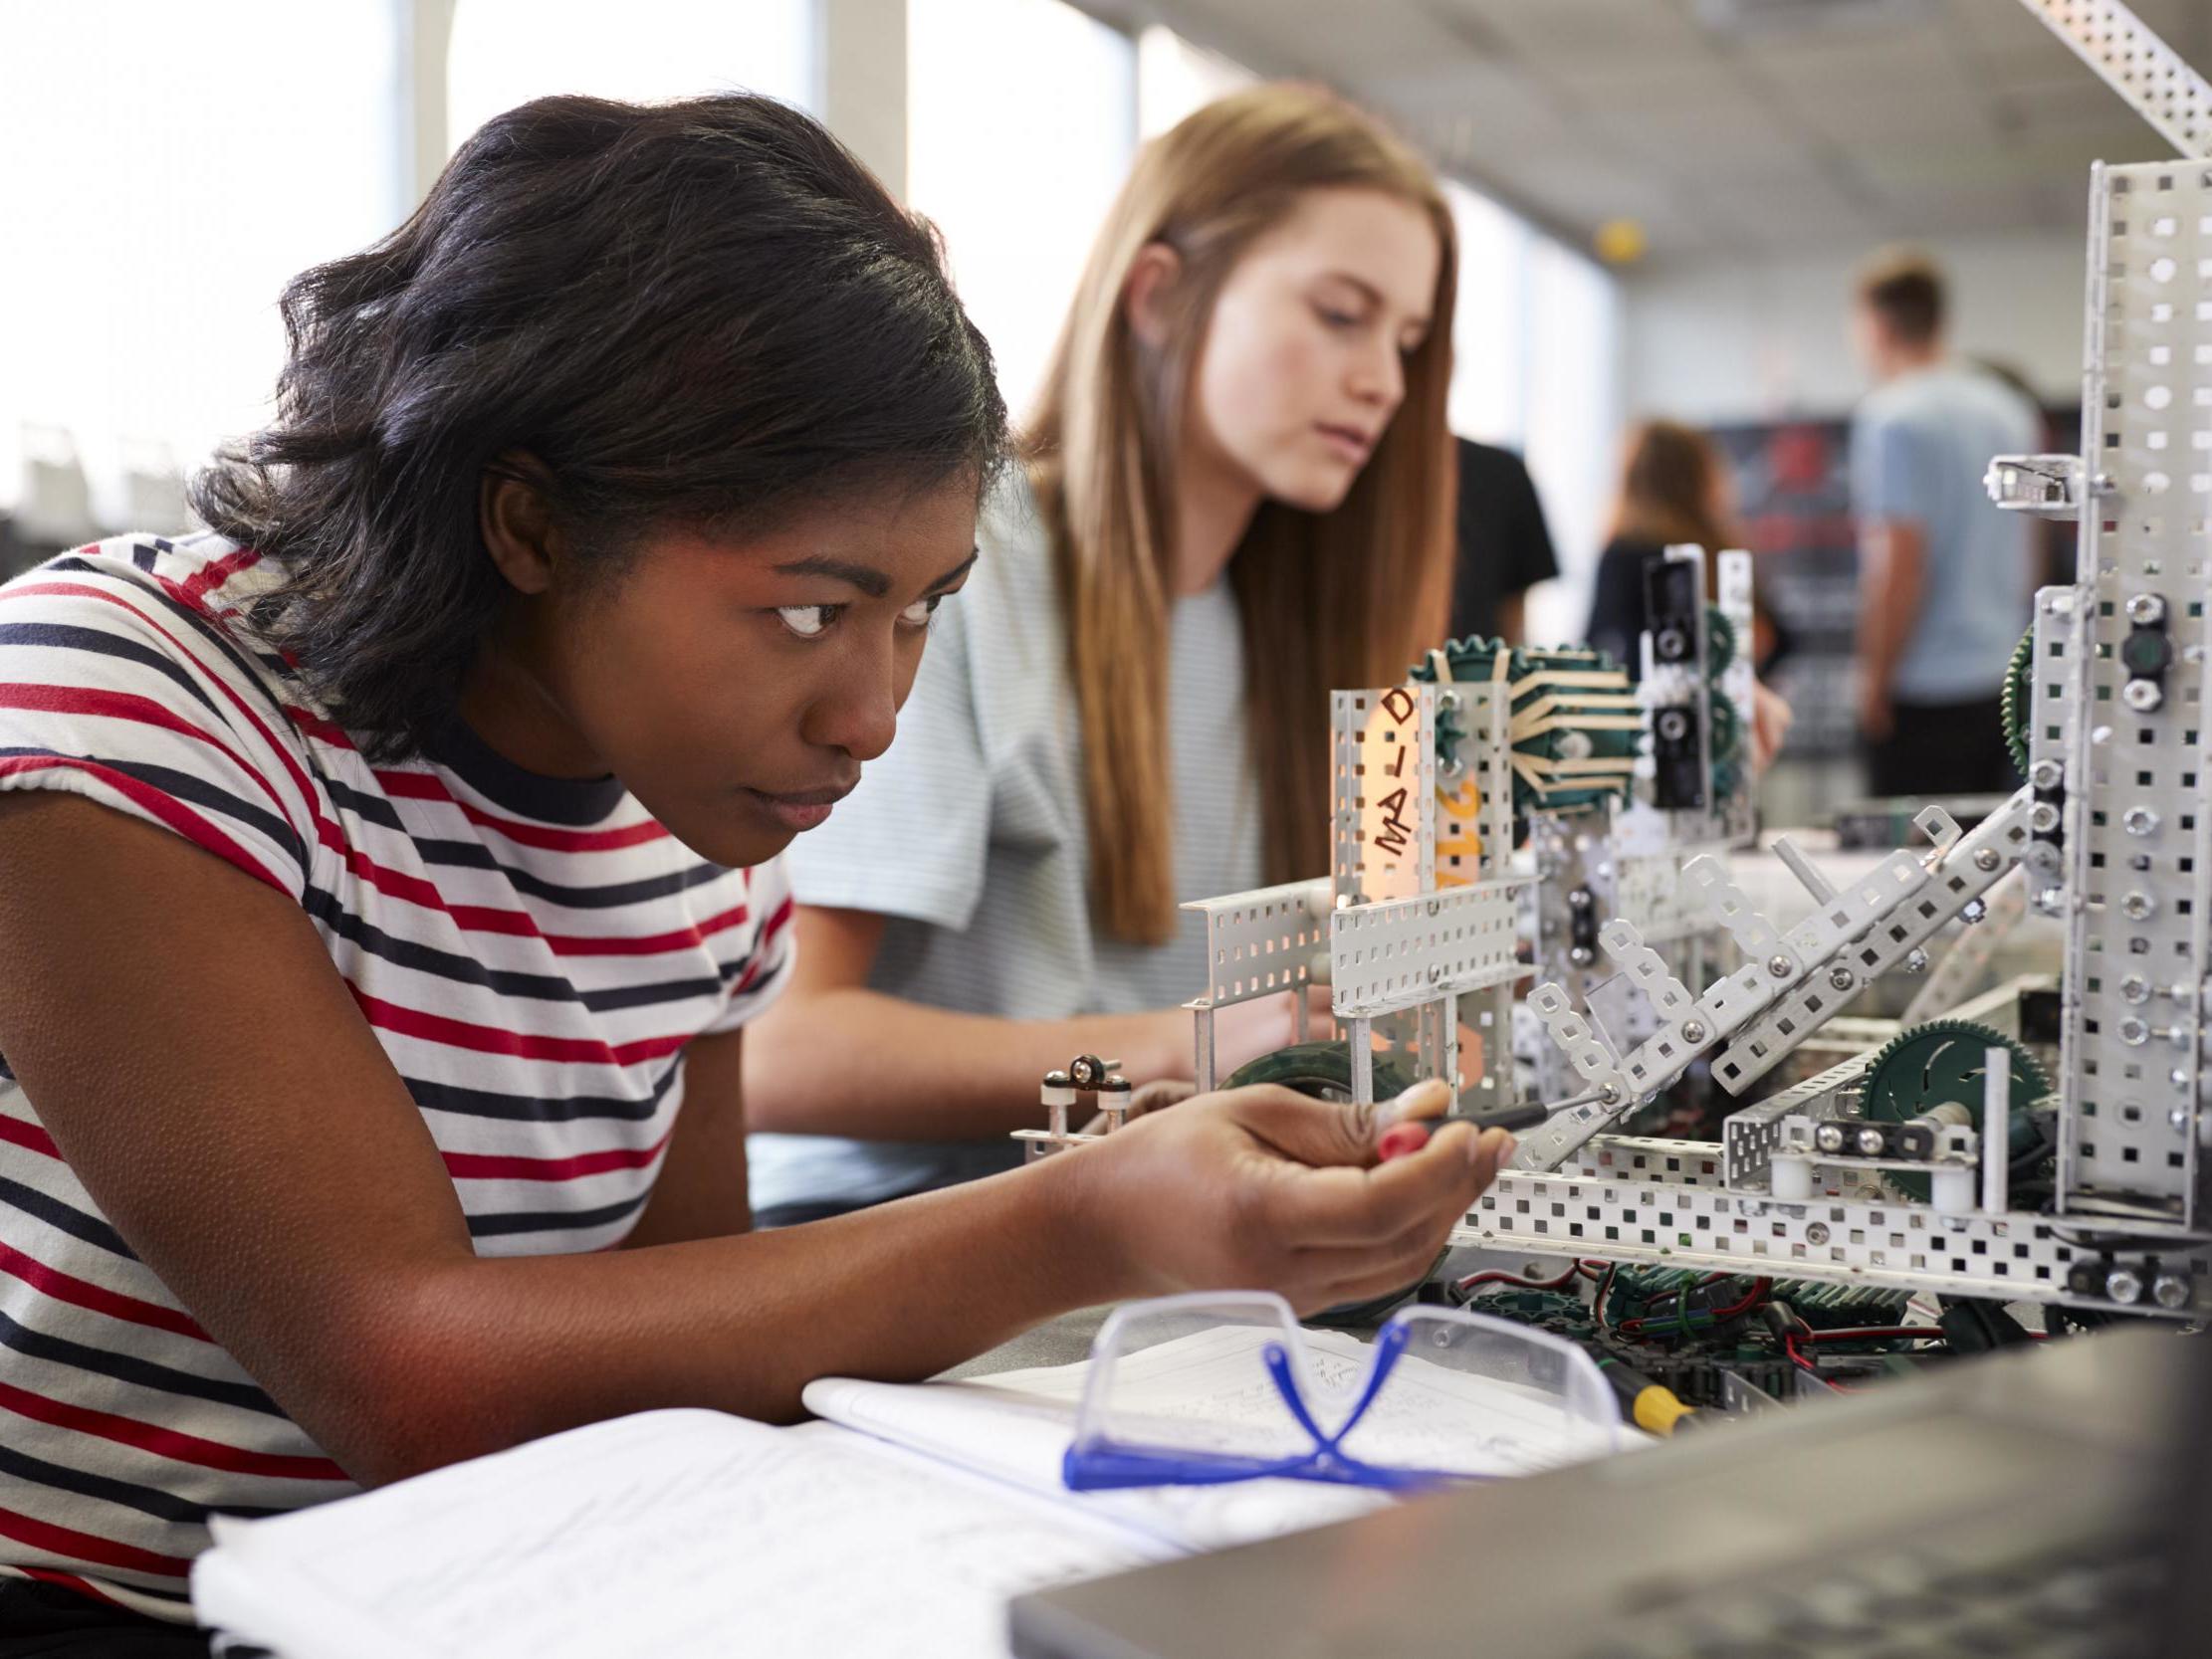 Many girls still see science and technology as the domain of boys